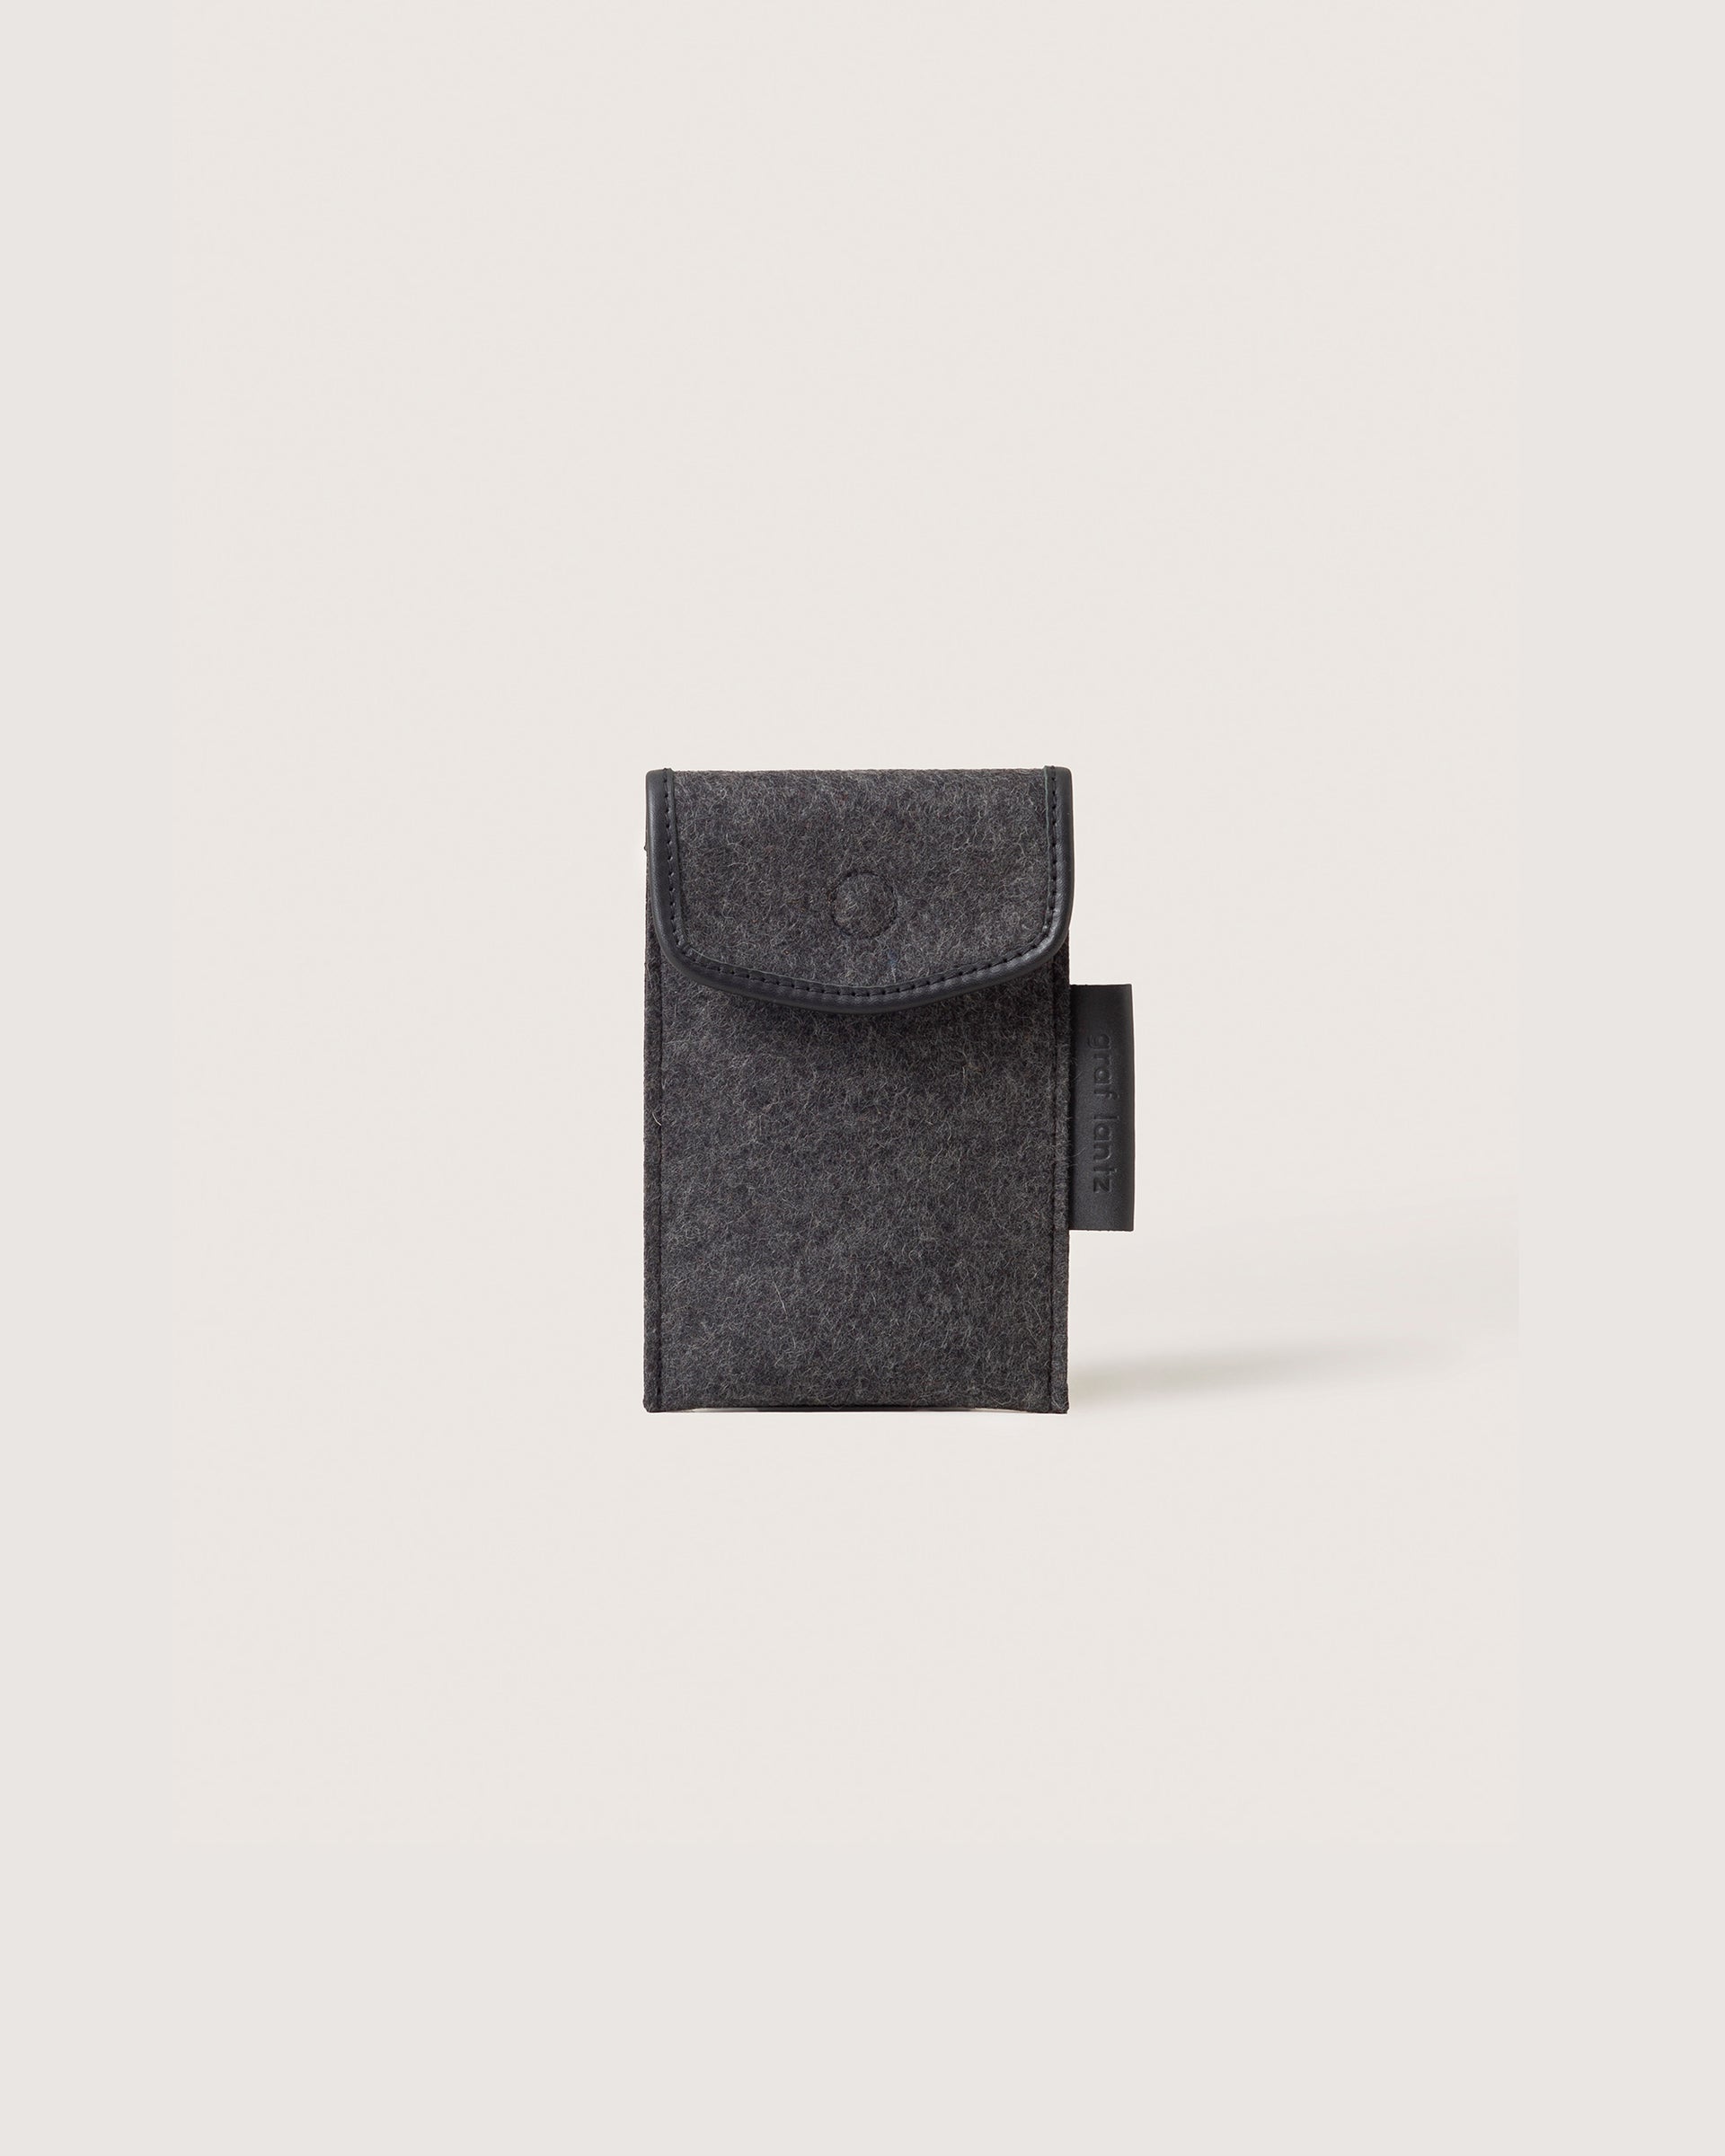 Merino Wool Envelope Accessory Sleeve in charcoal with black leather application, front view